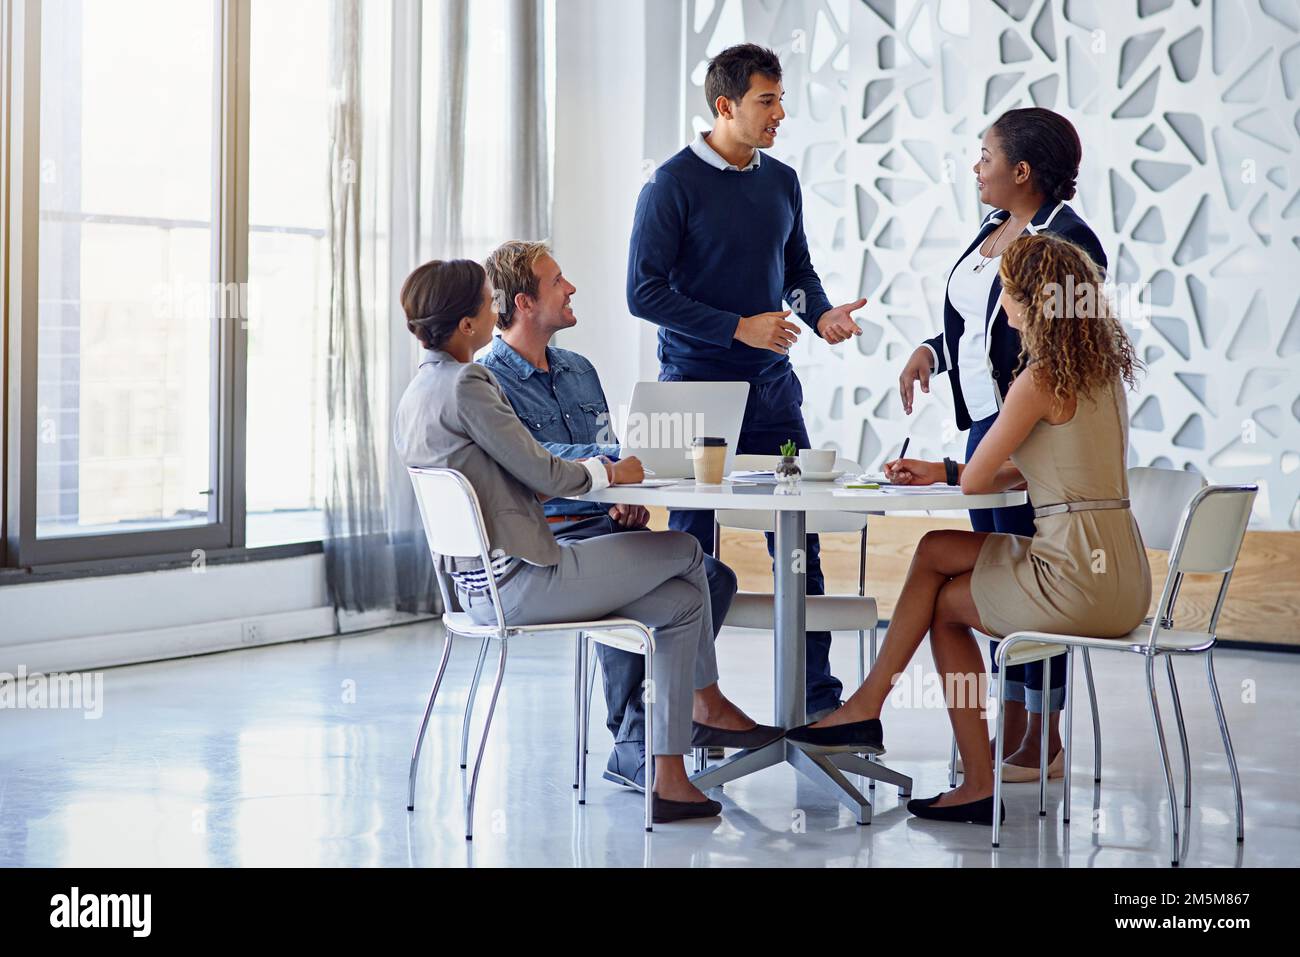 Sharing is business expertise. a group of colleagues working together in an office. Stock Photo